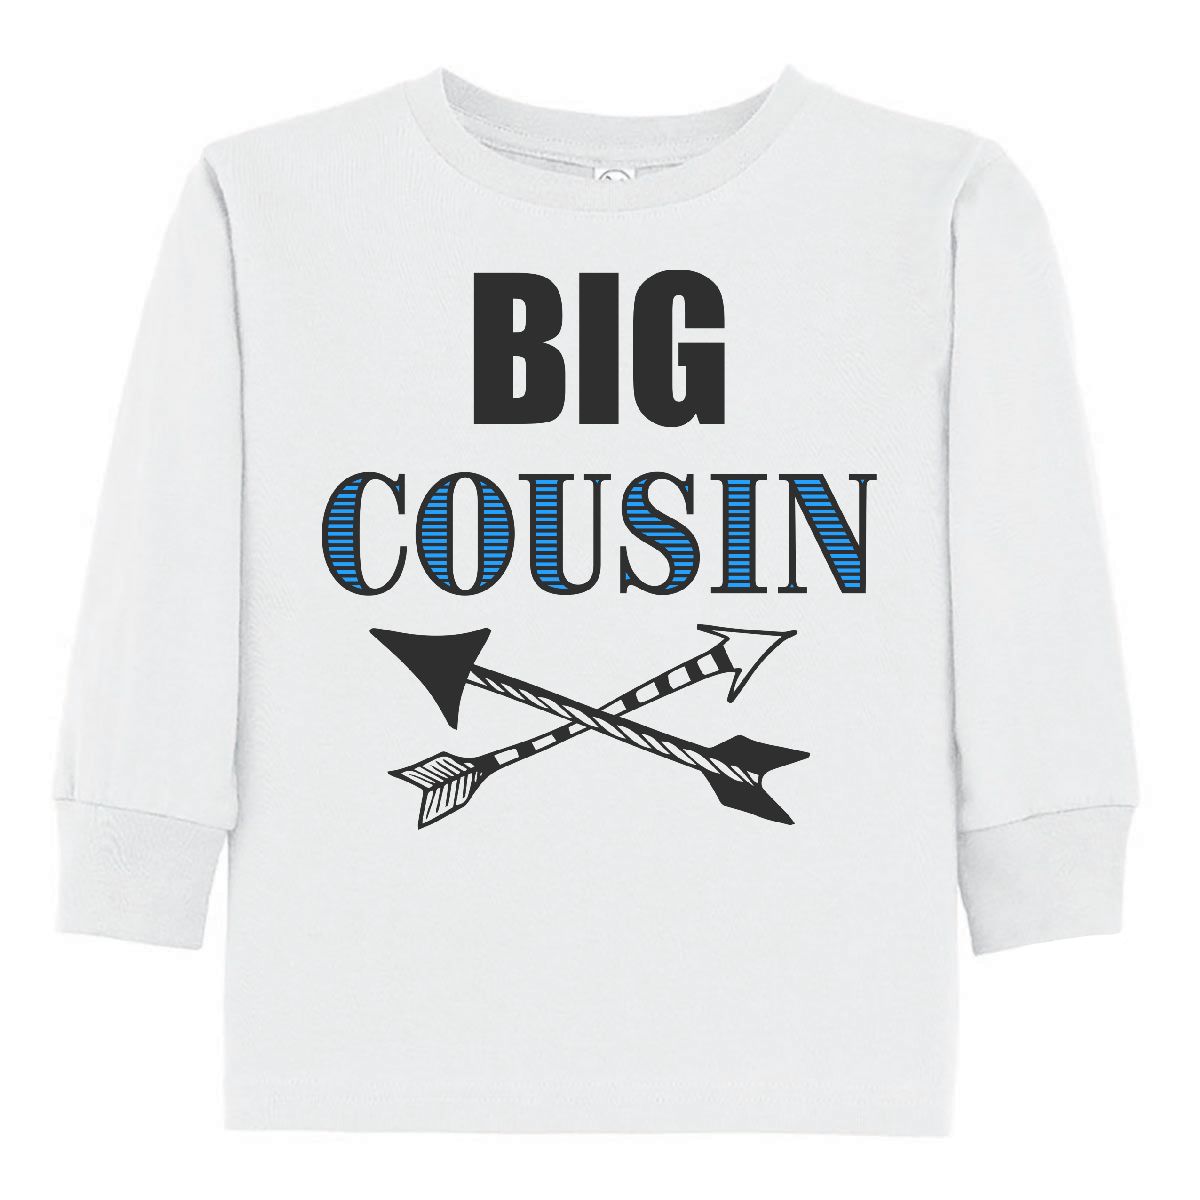 cousin t shirts toddlers